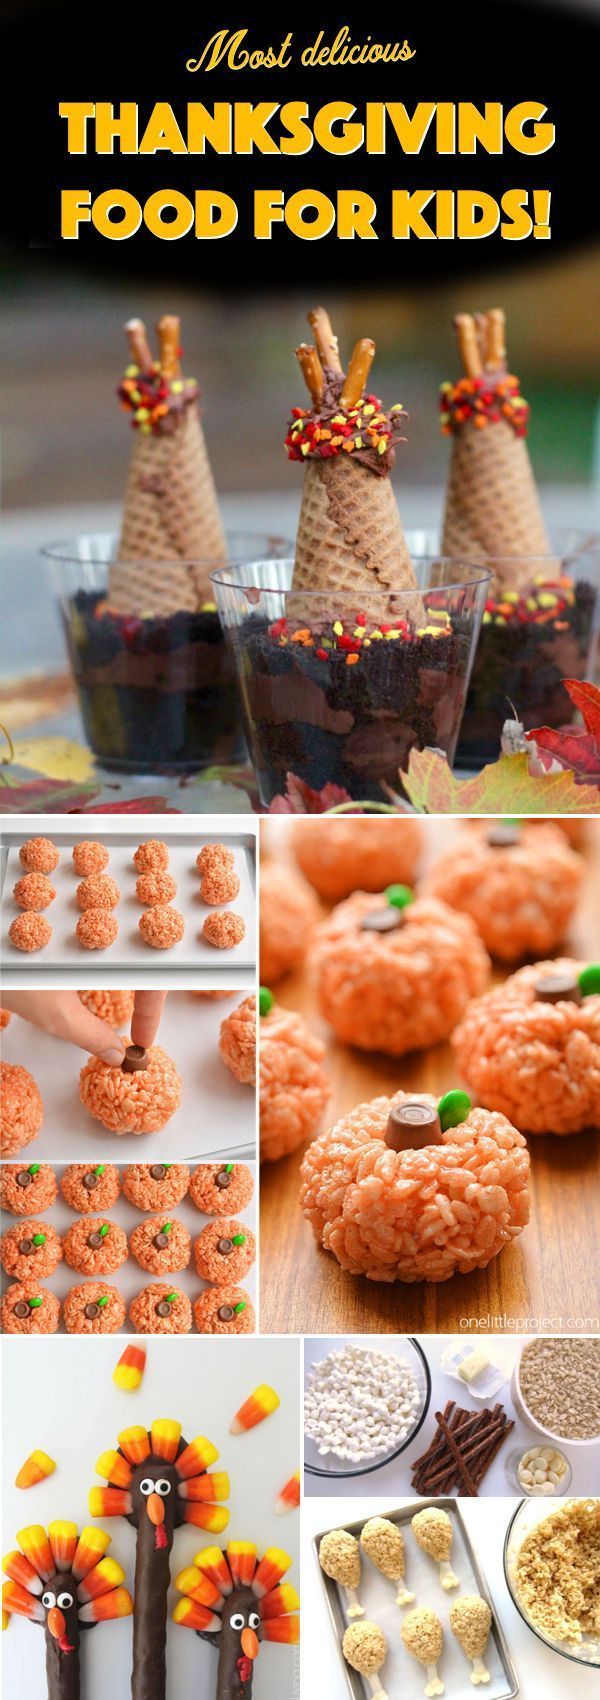 The Most Delicious Thanksgiving Food for Kids! -   15 thanksgiving desserts For Kids ideas